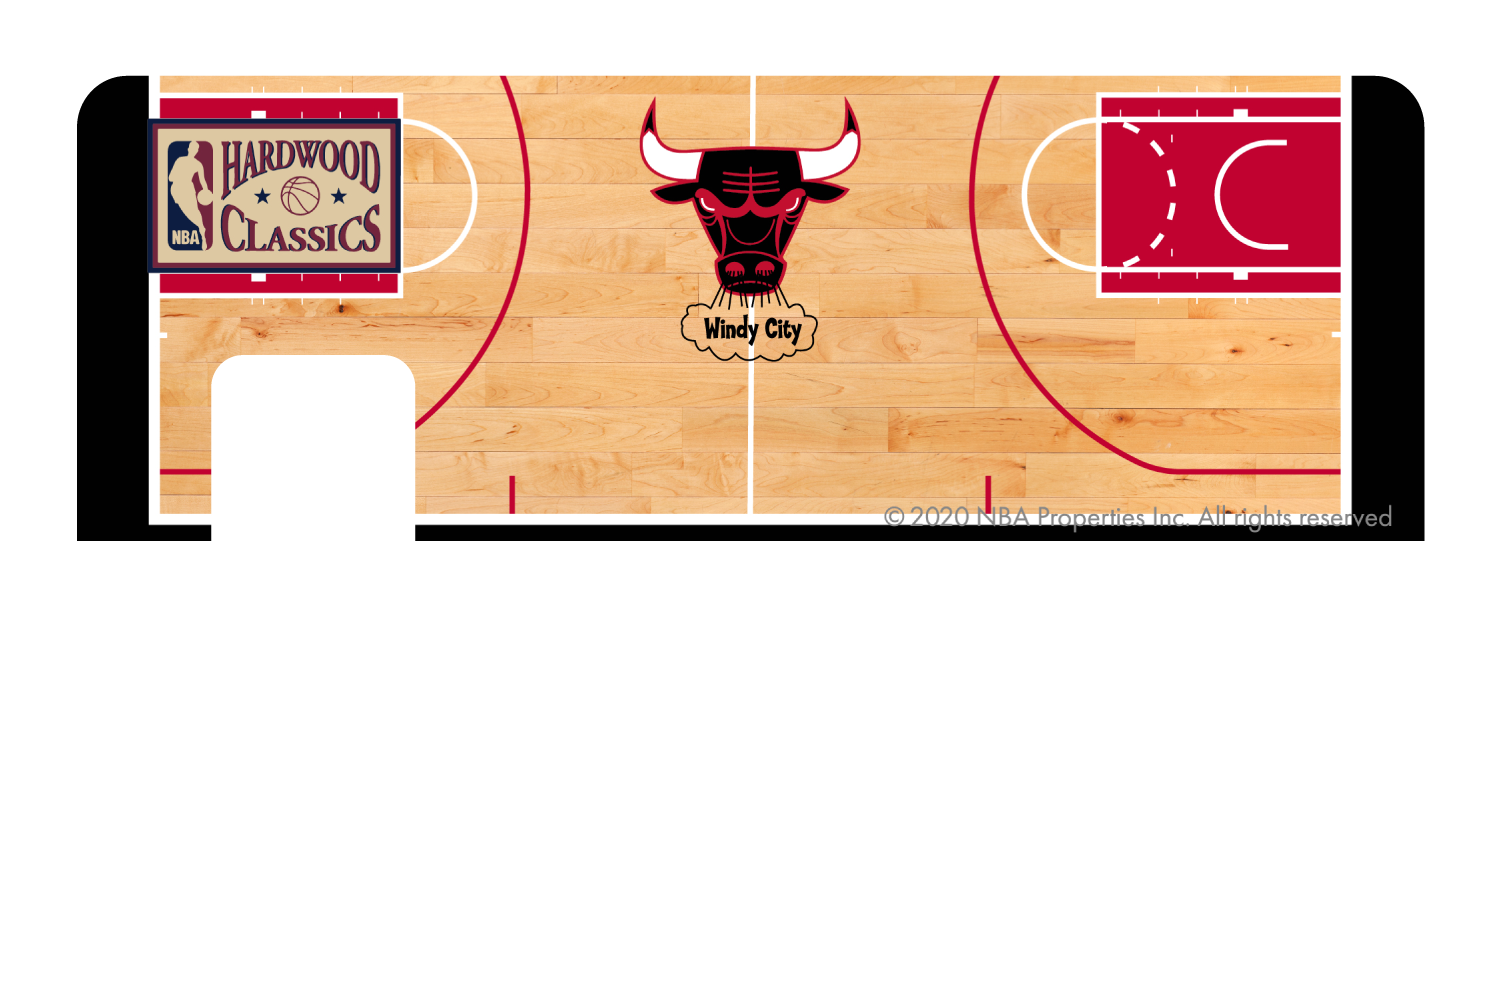 Credit Debit Card Skins | Cucu Covers - Customize Any Bank Card - Chicago Bulls: Retro Courtside Hardwood Classics, Full Cover / Small Chip